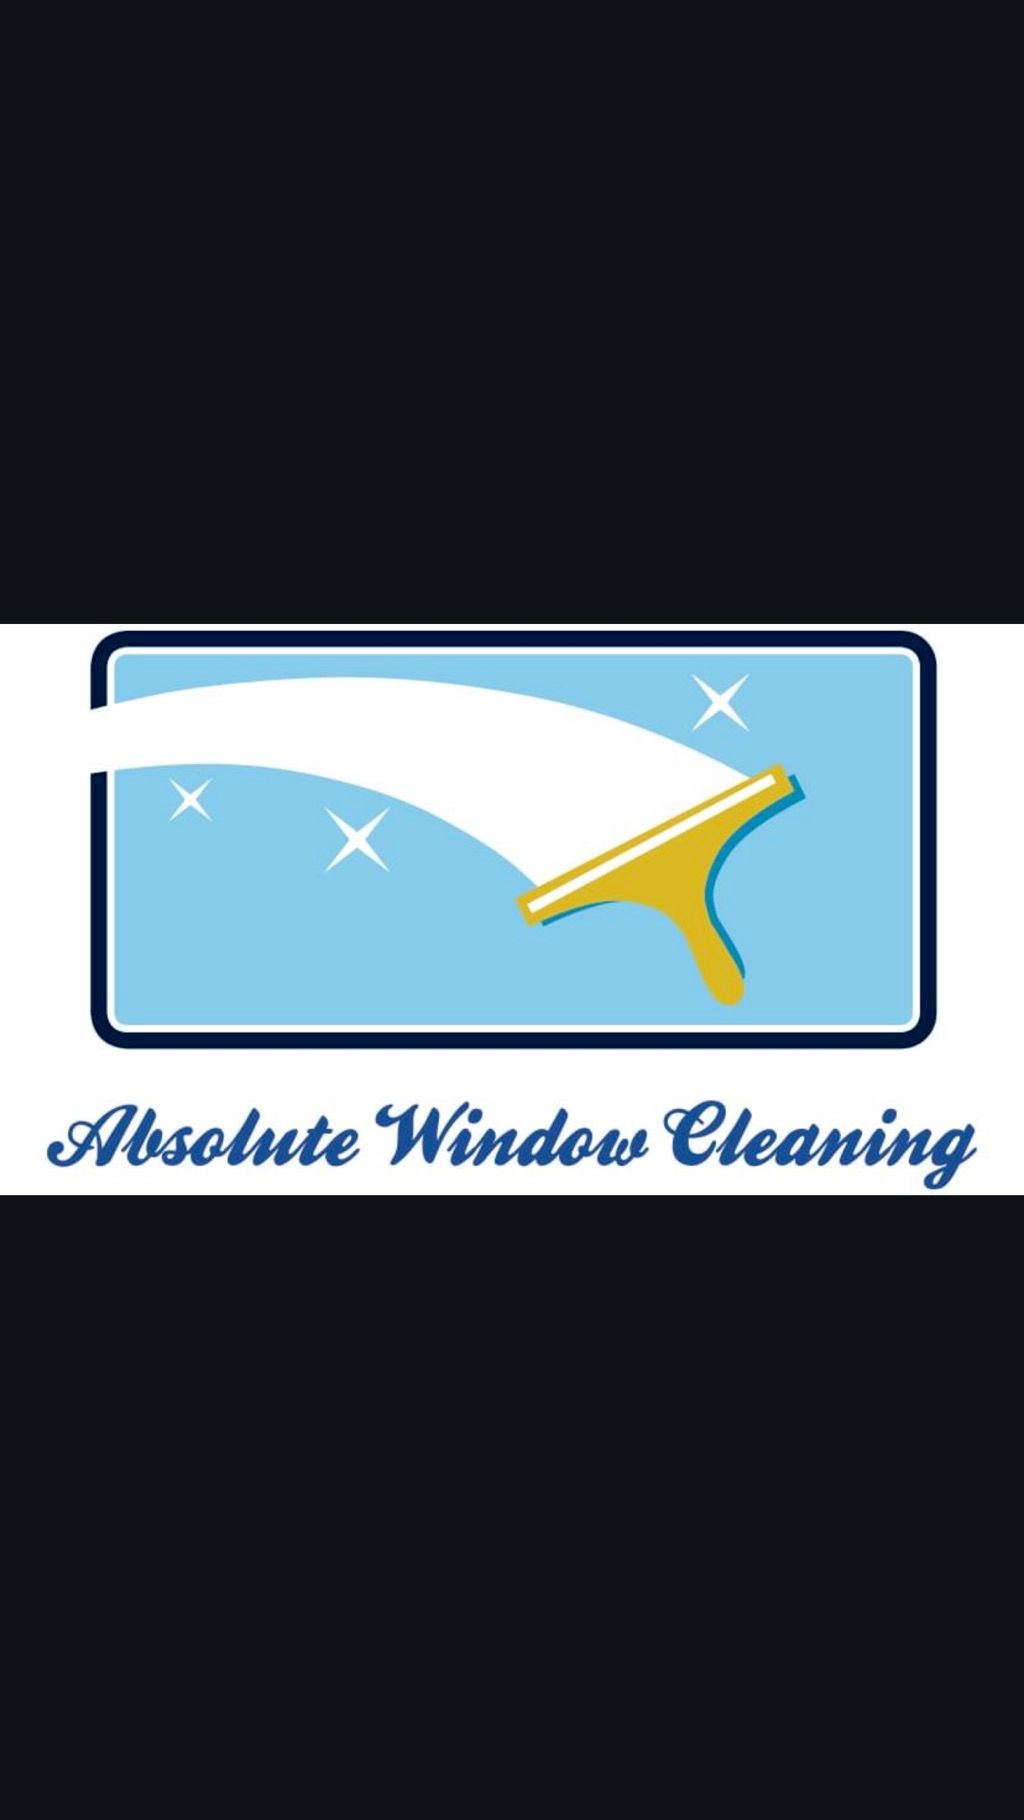 Absolute Window Cleaning, LLC.